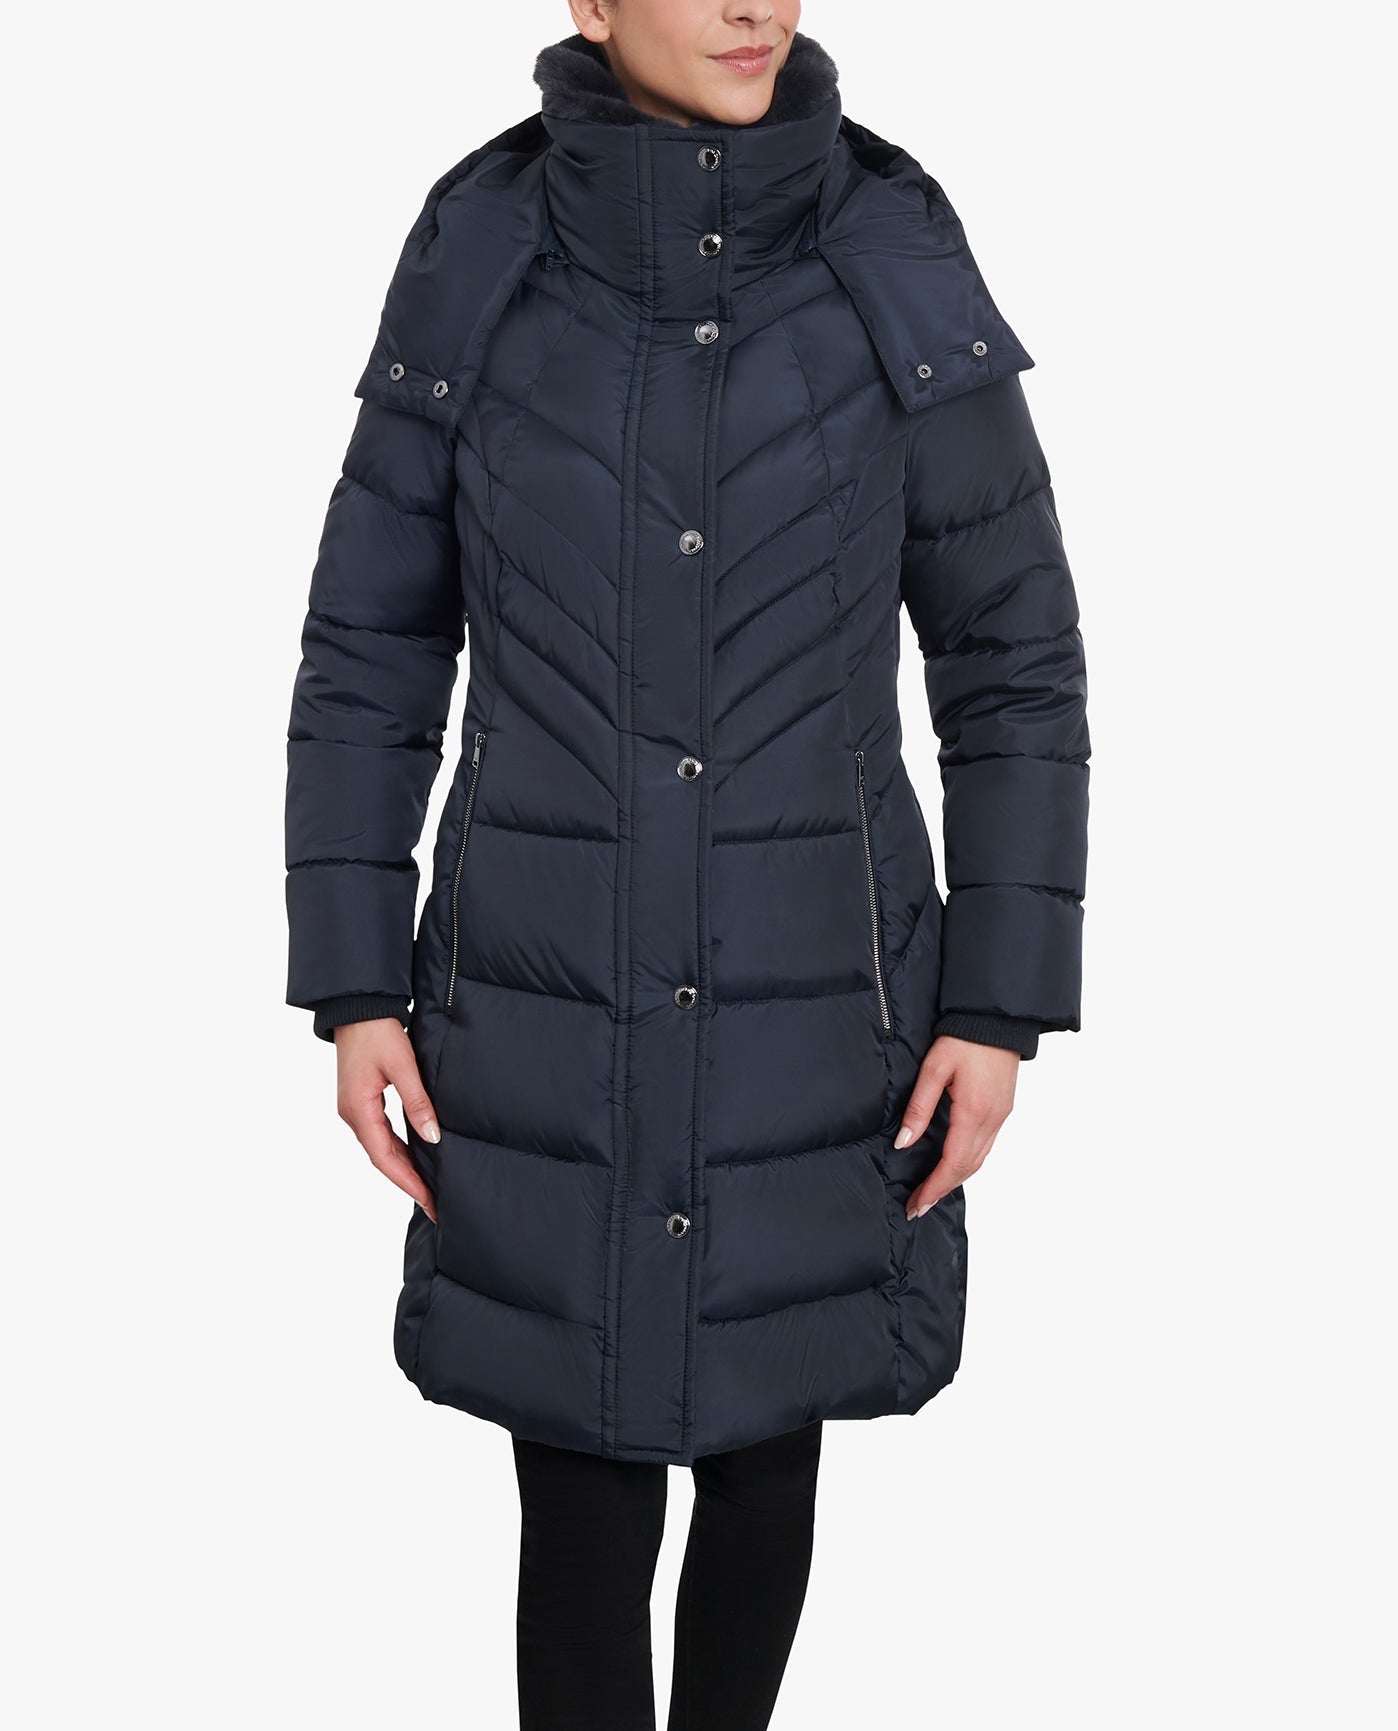 SIDE VIEW OF ZIP-FRONT HOODED HEAVY WEIGHT PUFFER JACKET WITH BUTTON-OFF FUR COLLAR | NAVY